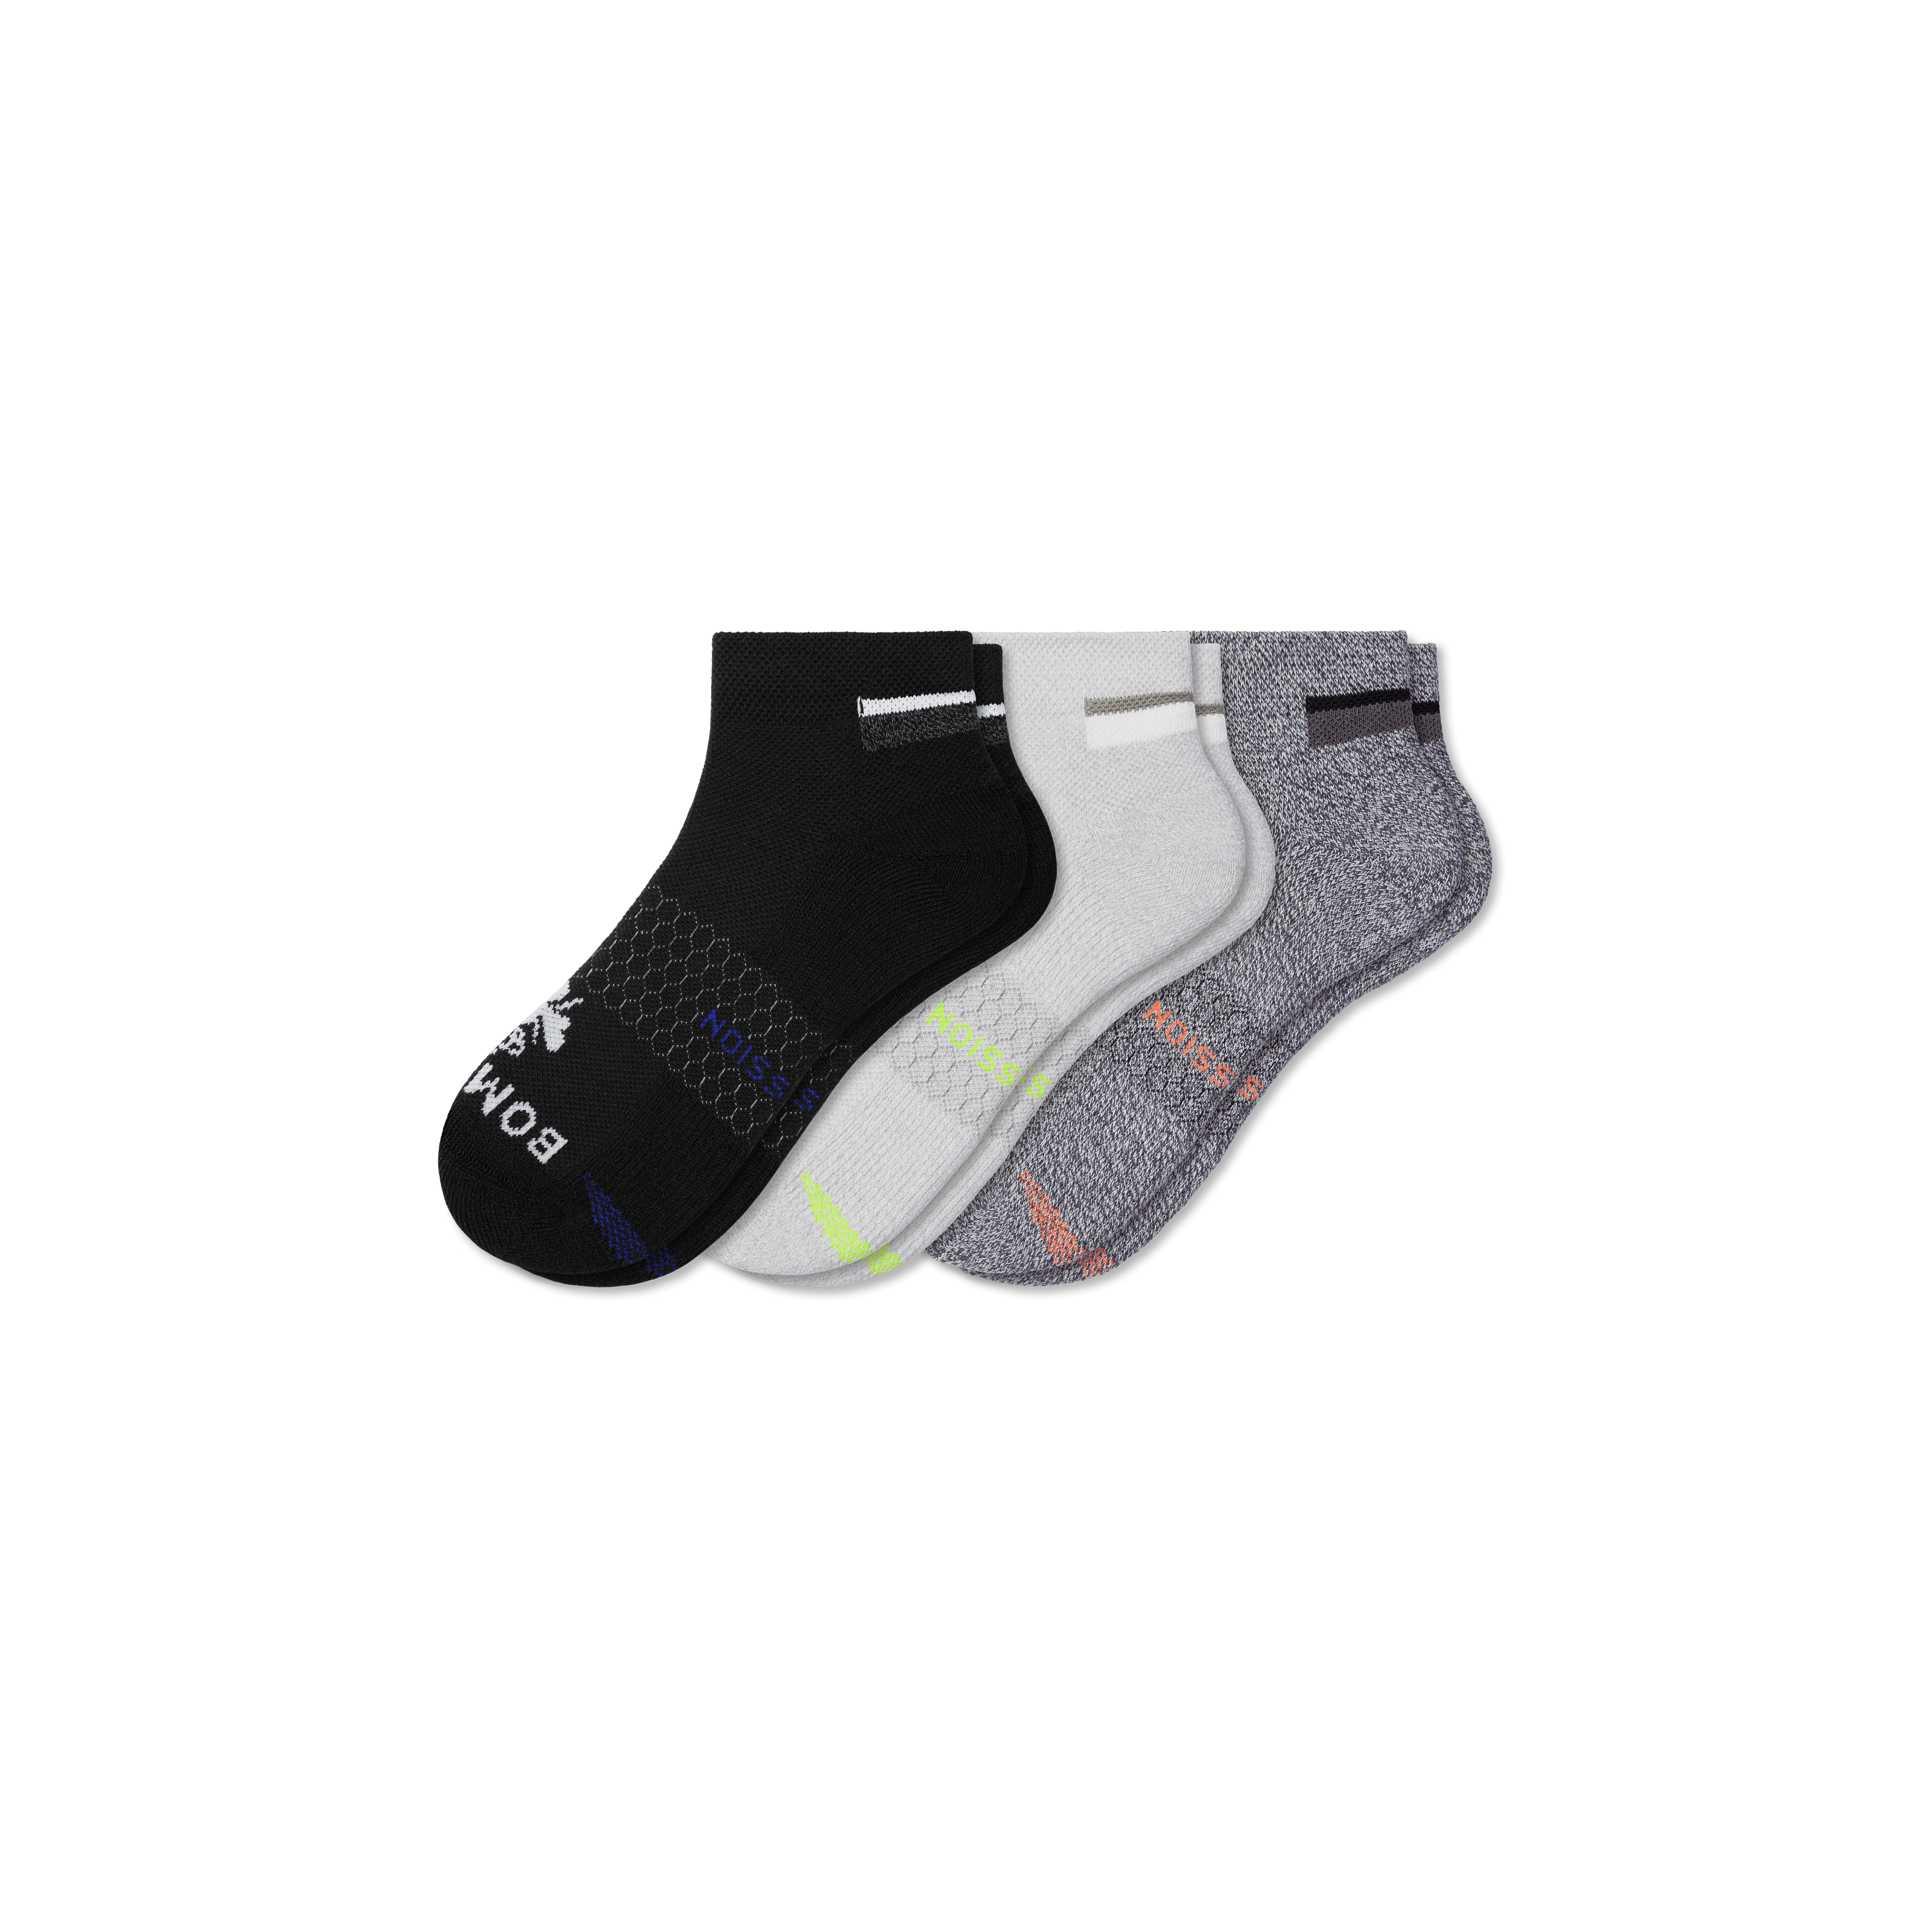 Bombas Performance Compression Ankle Socks 3-pack In Black Charcoal Grey